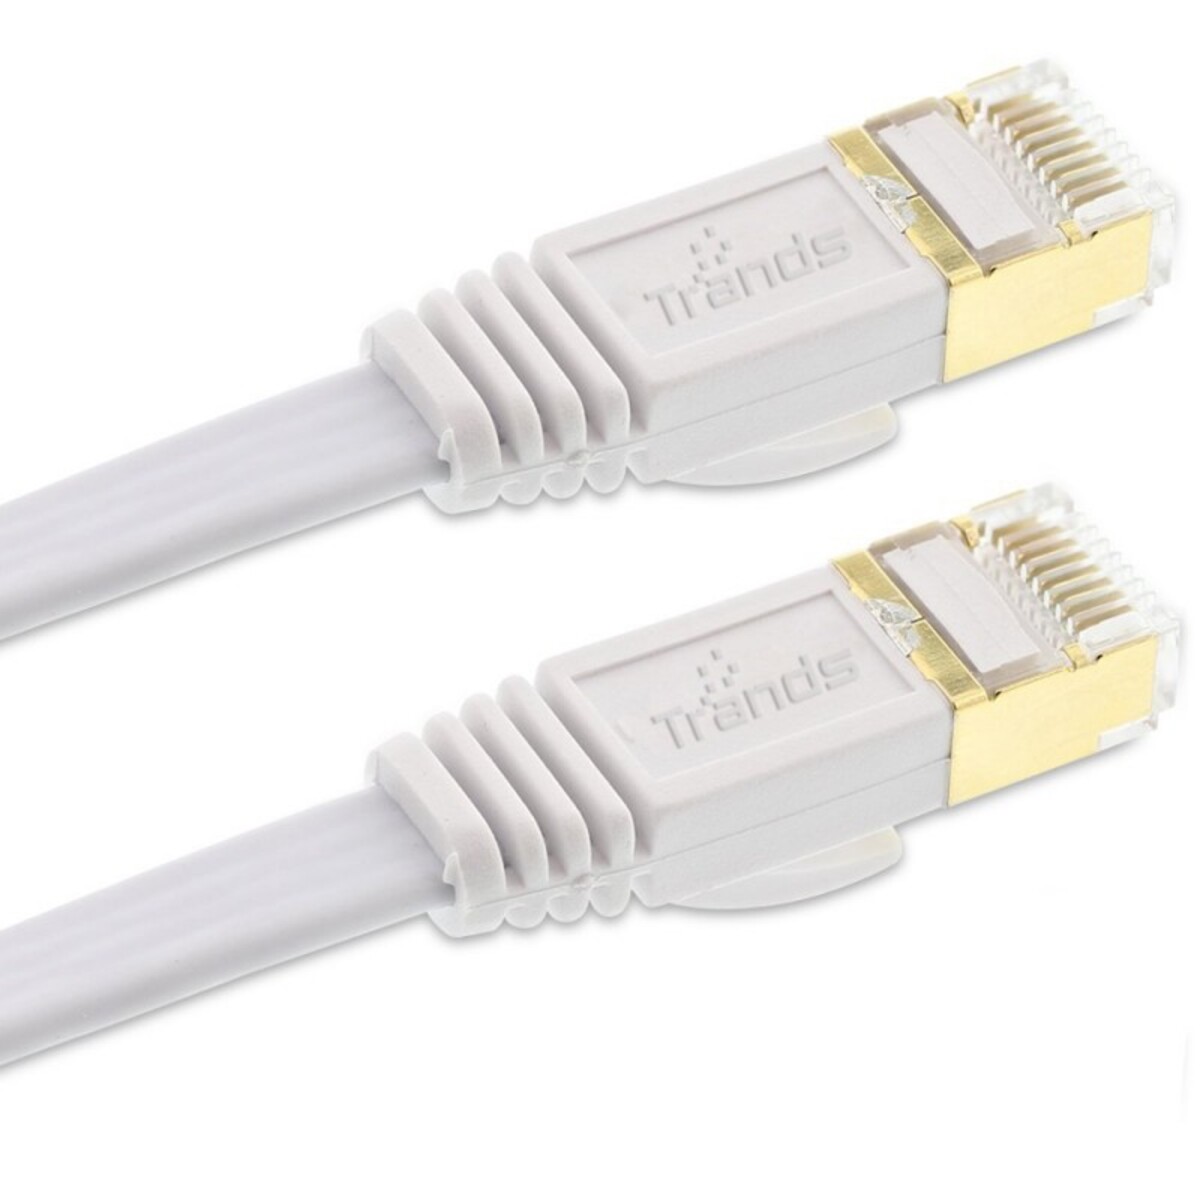 Trands CAT 7 Networking Ethernet Flat Cable speeds up to 10Gbps 3 Meter CA7178